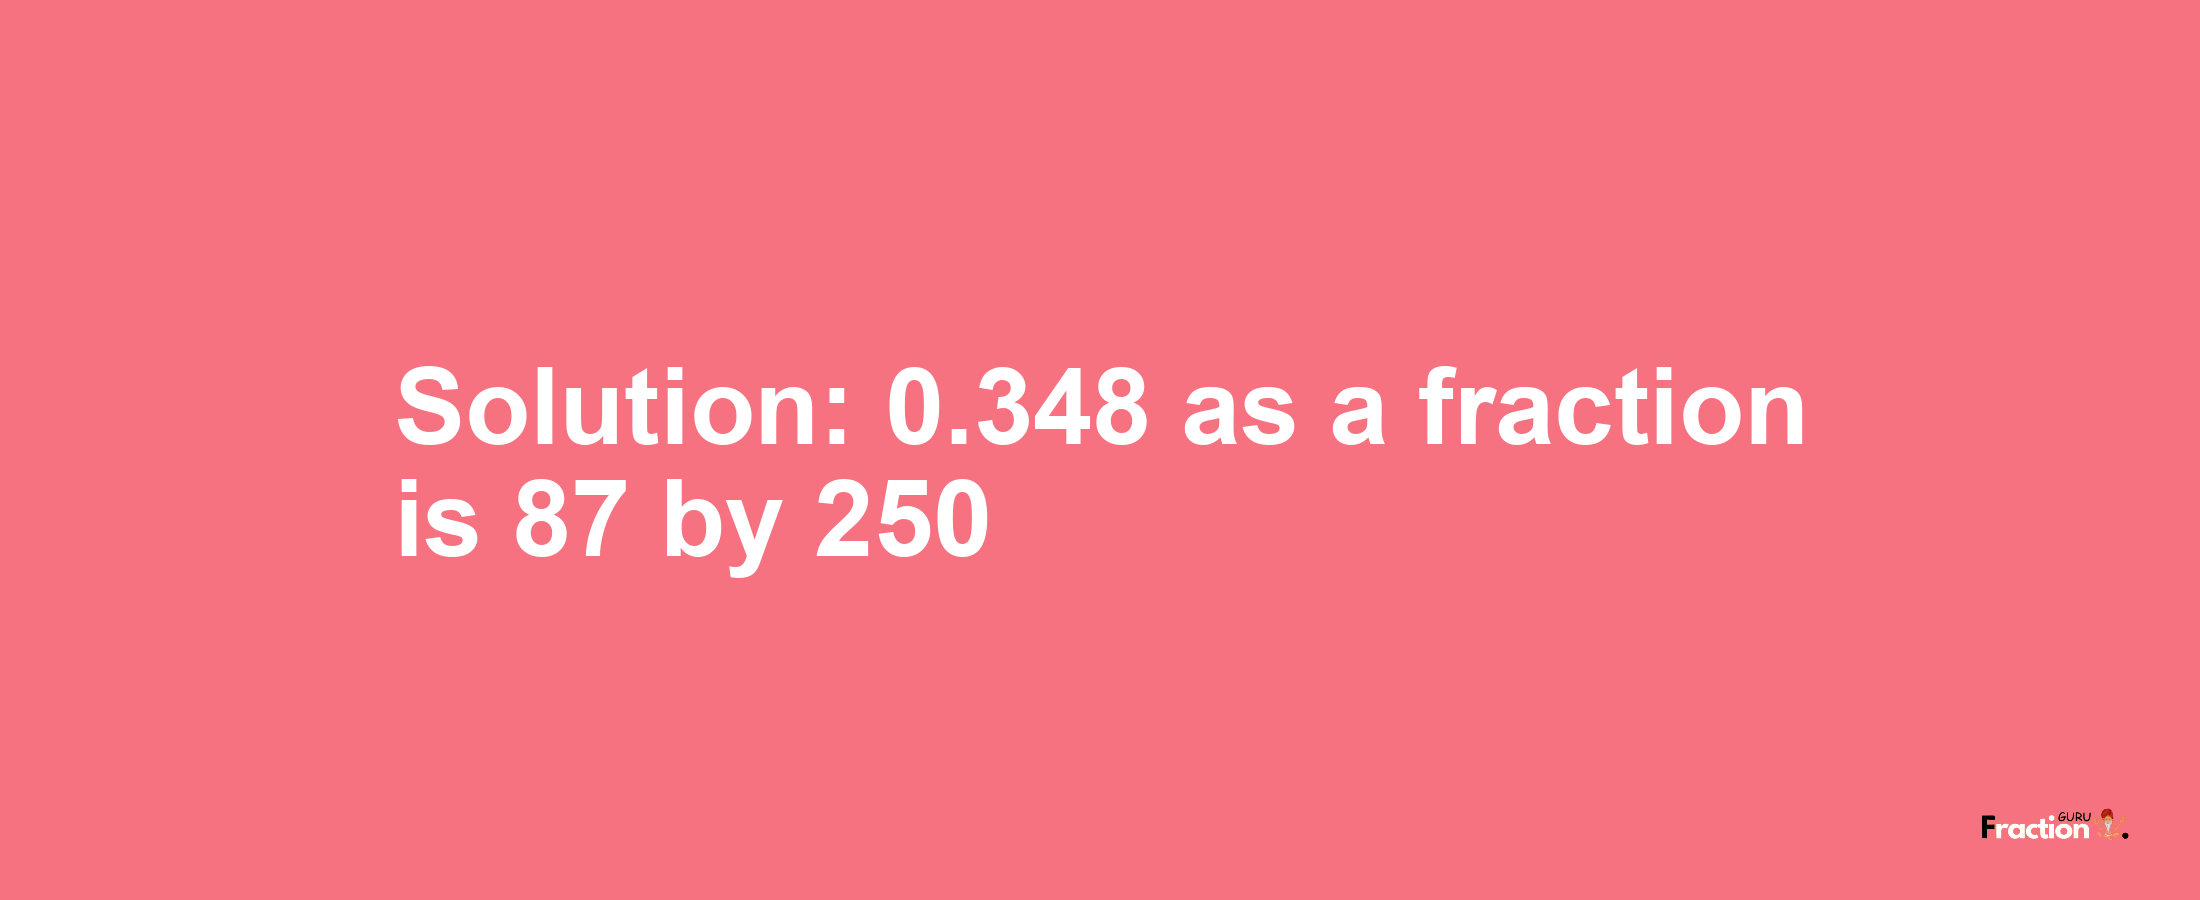 Solution:0.348 as a fraction is 87/250